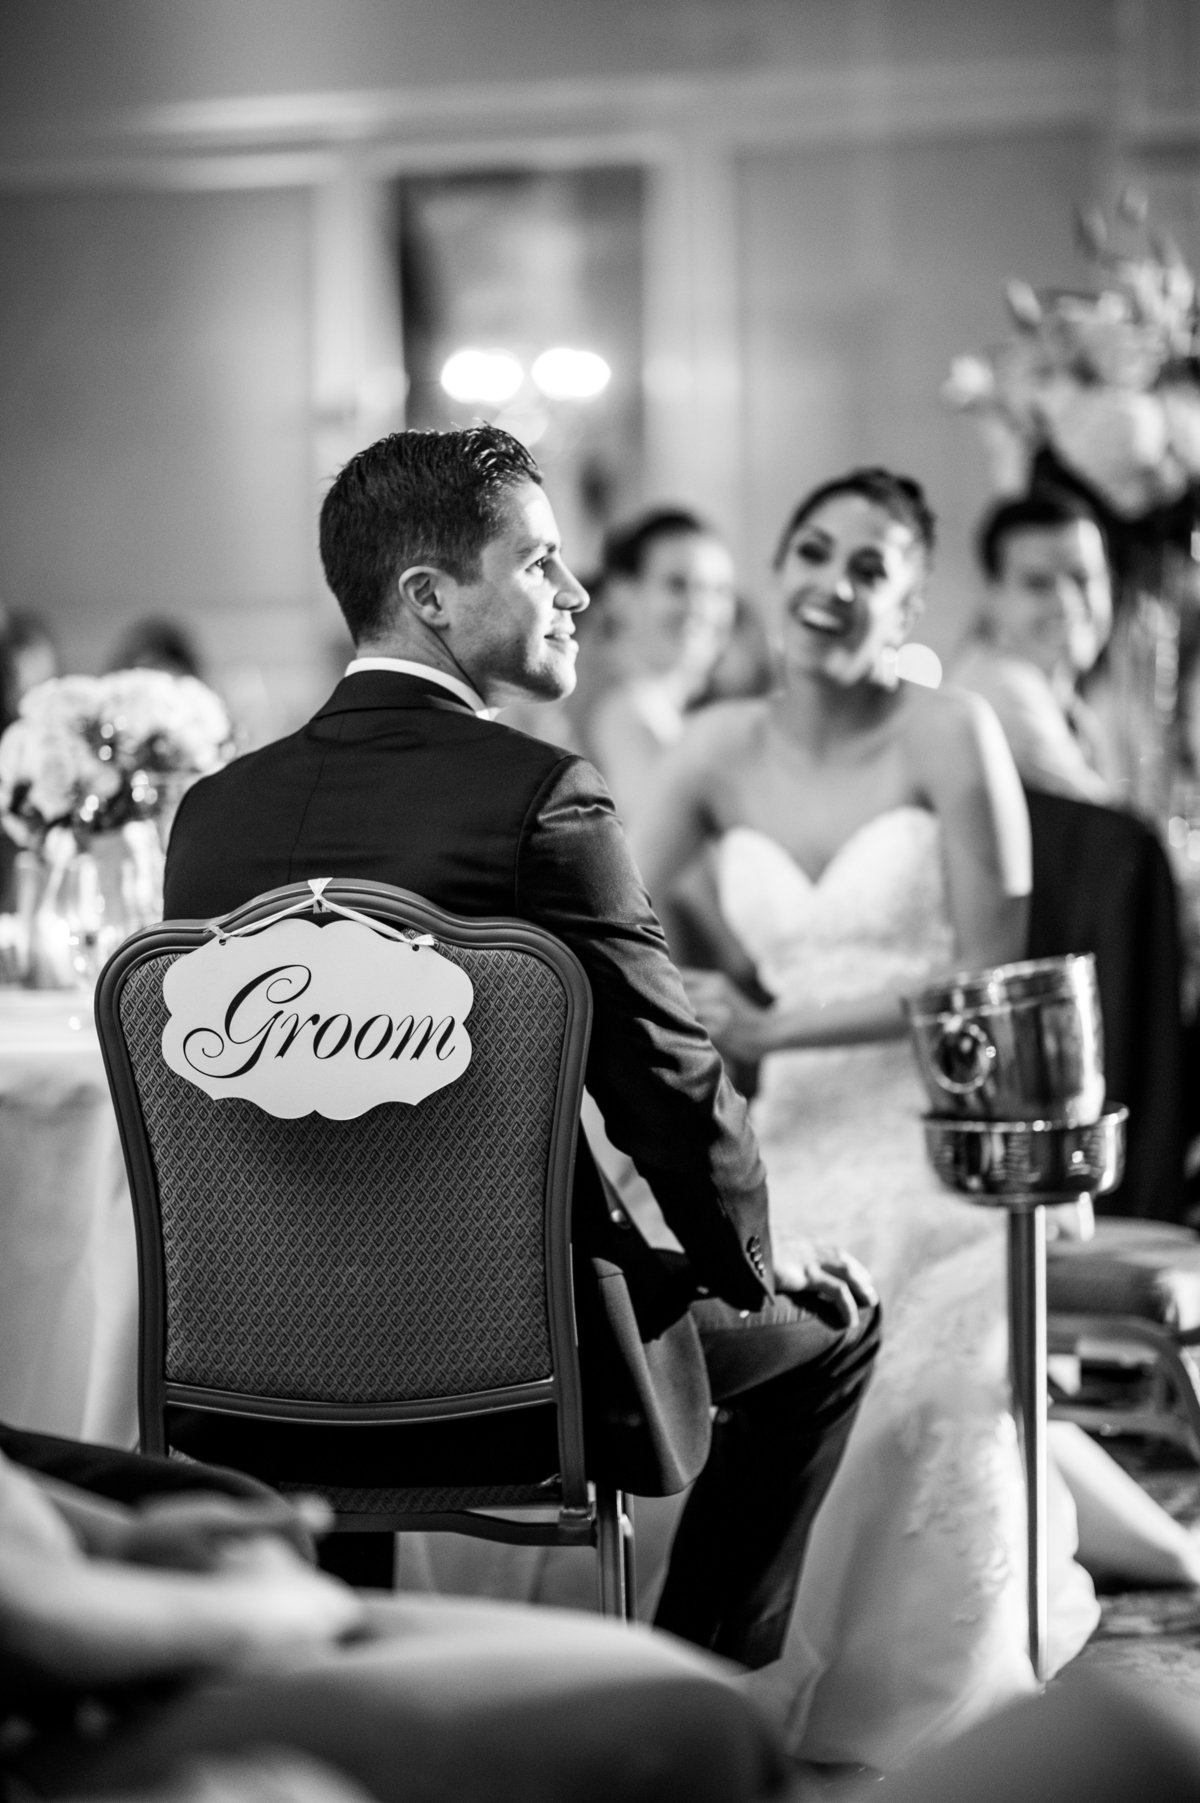 Groom sitting in his chair at the reception with a Groom sign hanging from the back.